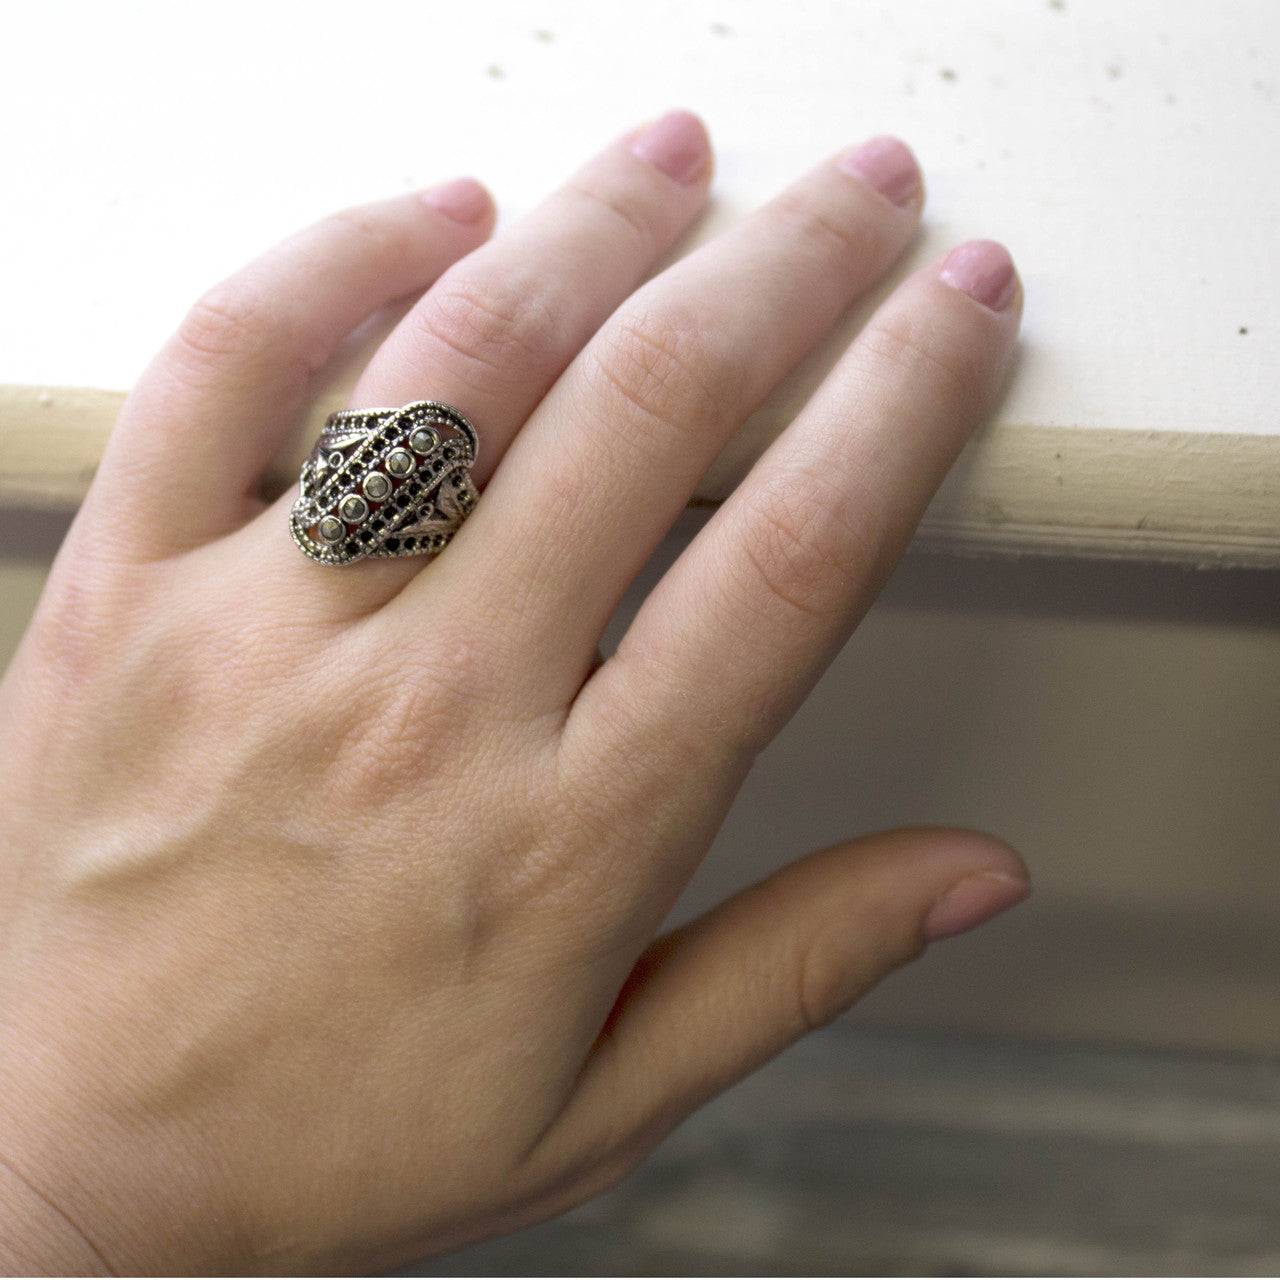 Vintage Genuine Marcasite Filigree Ring - Antique 18k White Gold Electgroplated - Made in USA